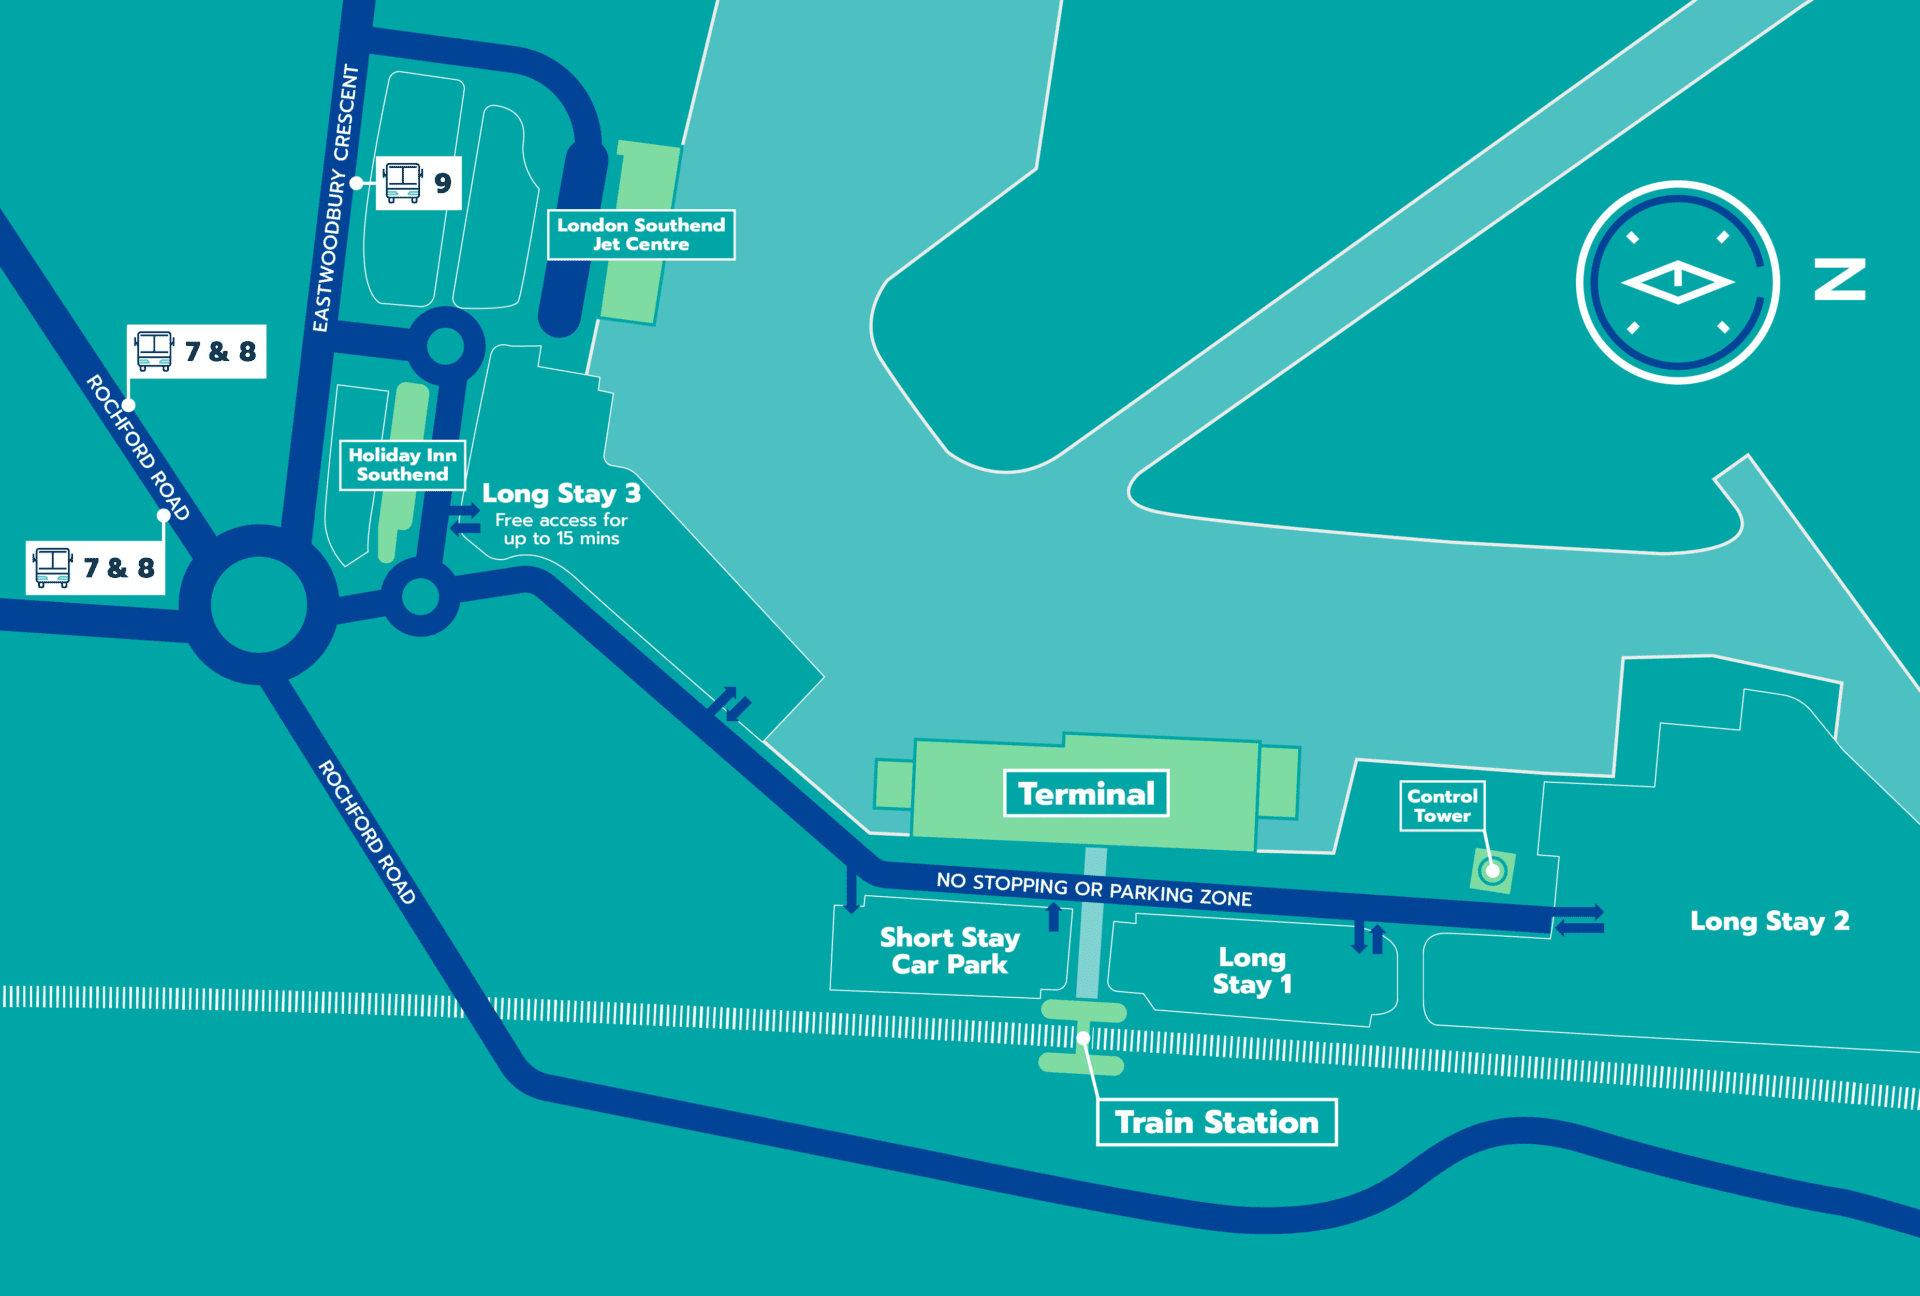 Map of all travel options to get to and from London Southend Airport, including bus stops, car parking and train station. 